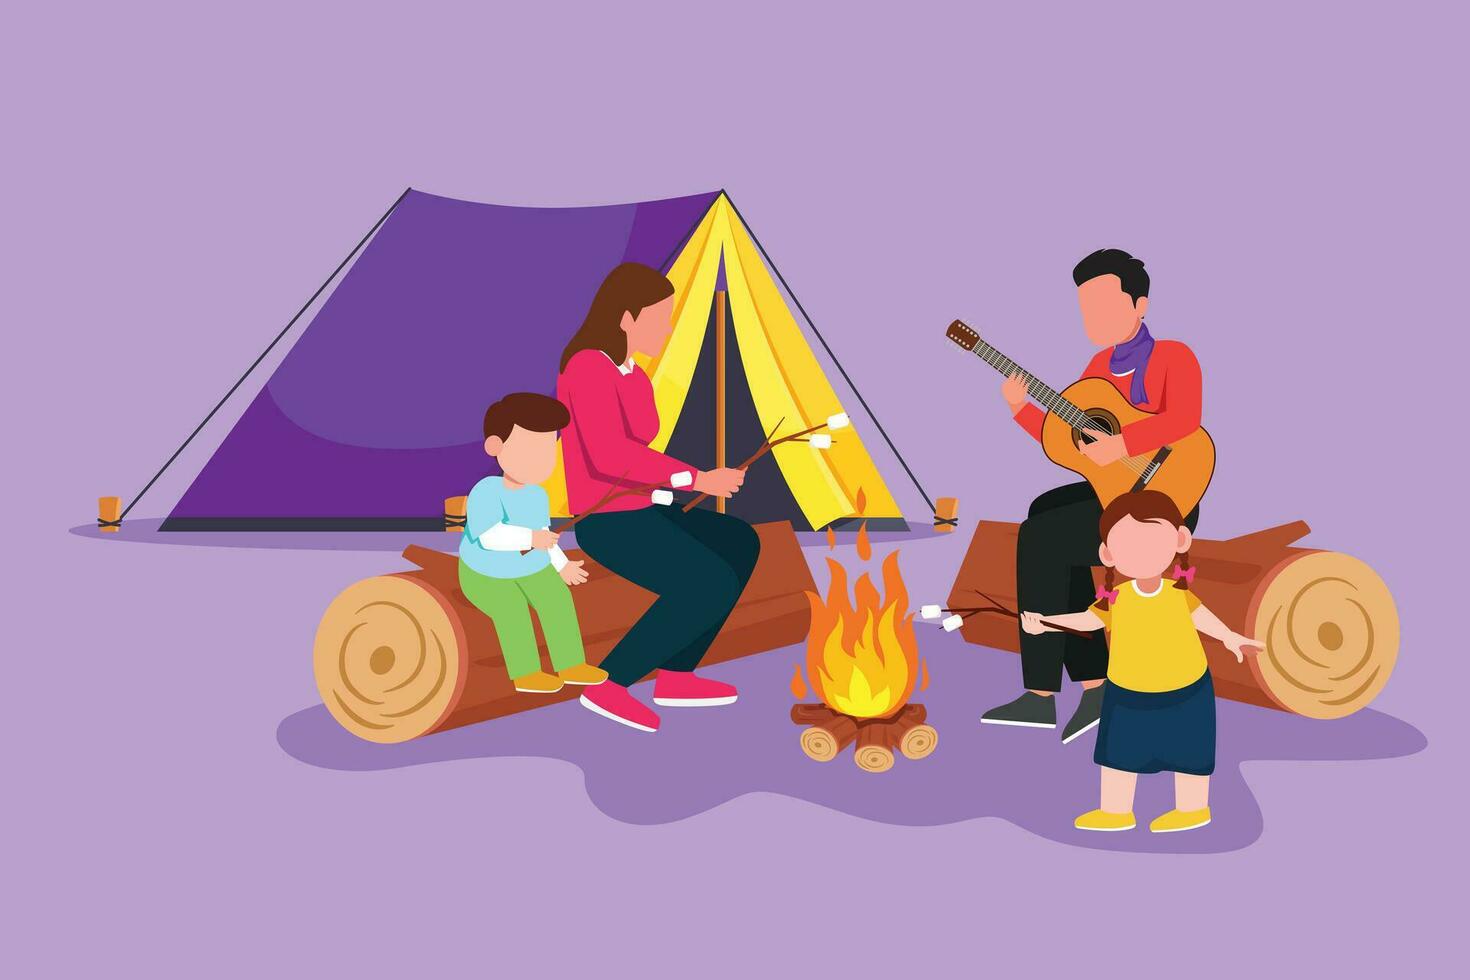 Cartoon flat style drawing of happy hiker family sit by campfire. Tourist campers. Dad playing guitar, mom and kids roast marshmallows. Night camping entertainment. Graphic design vector illustration